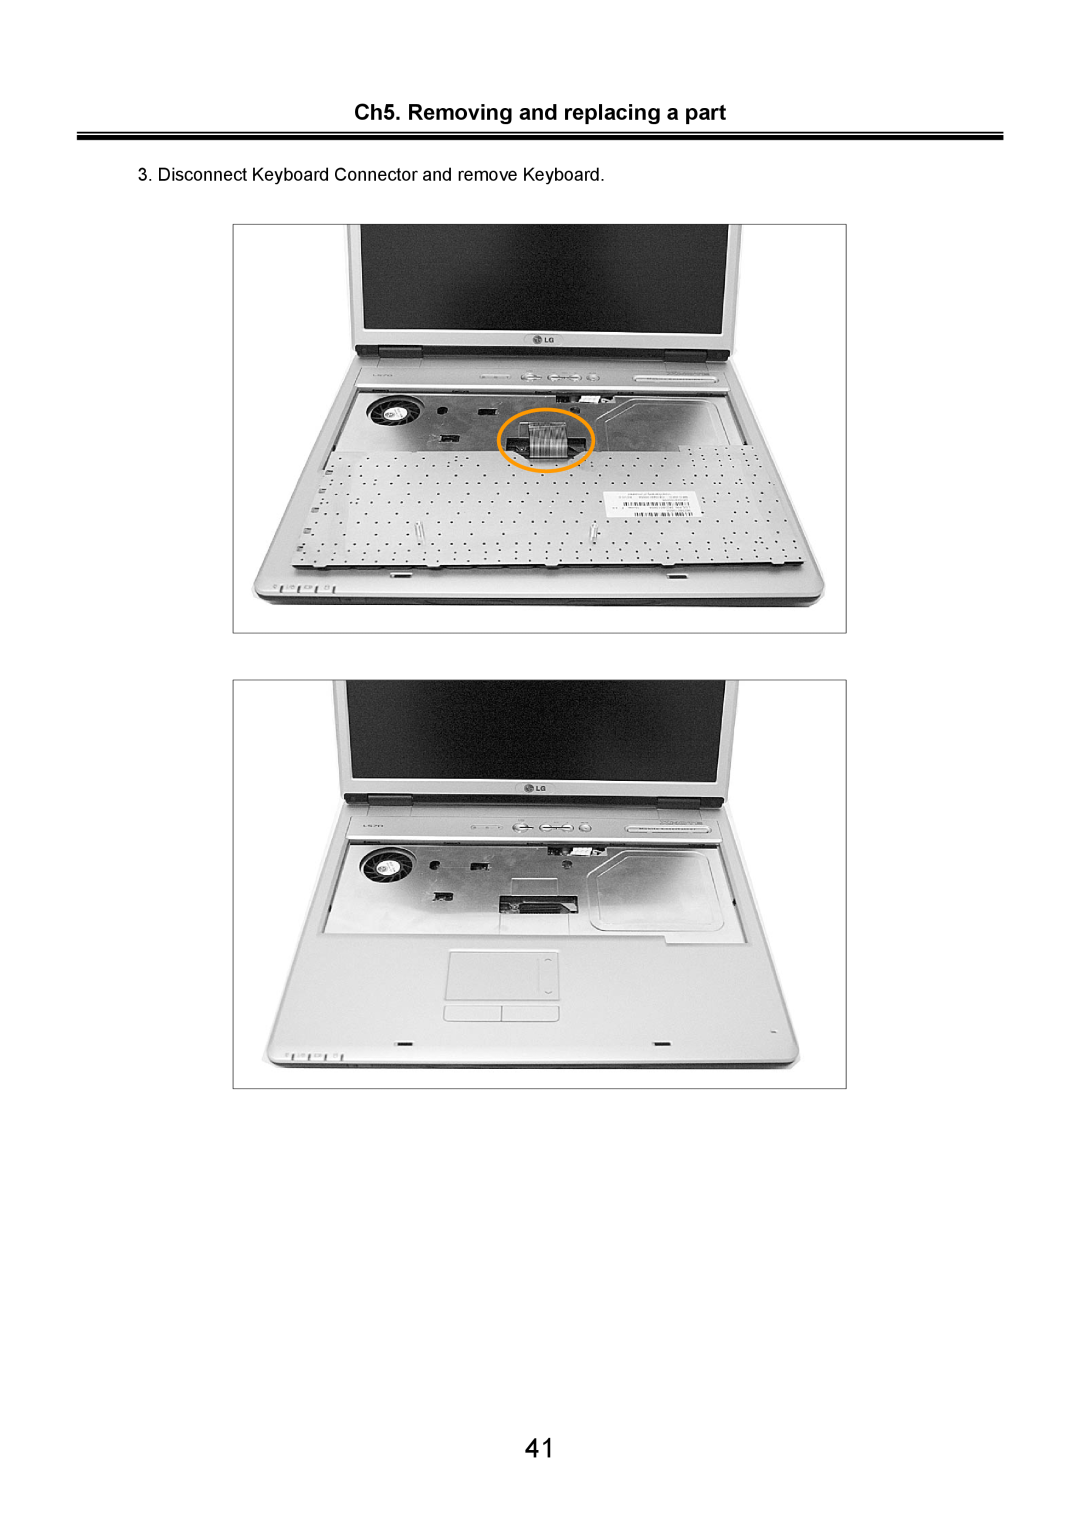 LG Electronics LS70 service manual Ch5. Removing and replacing a part, Disconnect Keyboard Connector and remove Keyboard 